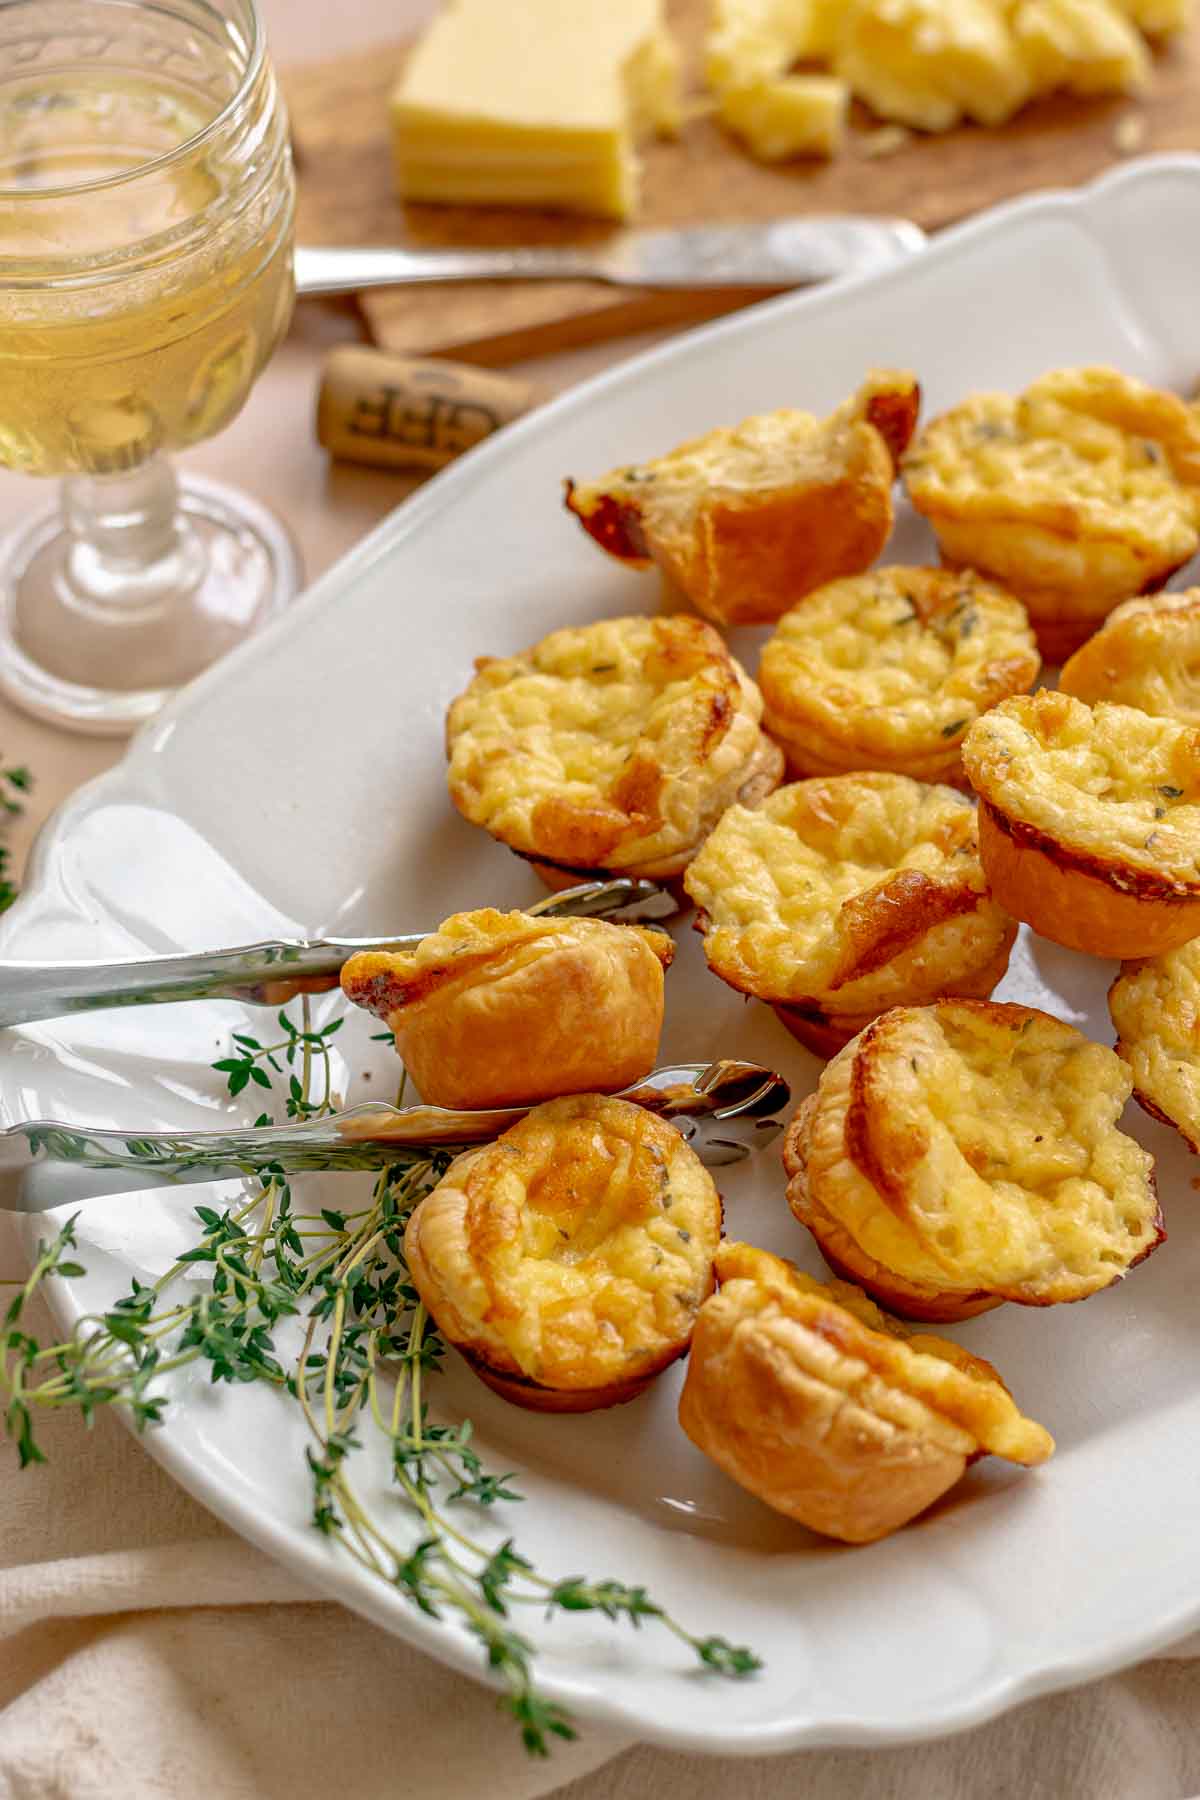 Tongs reach in to a platter of cheese tartlets. Wine and thyme sit on the site.